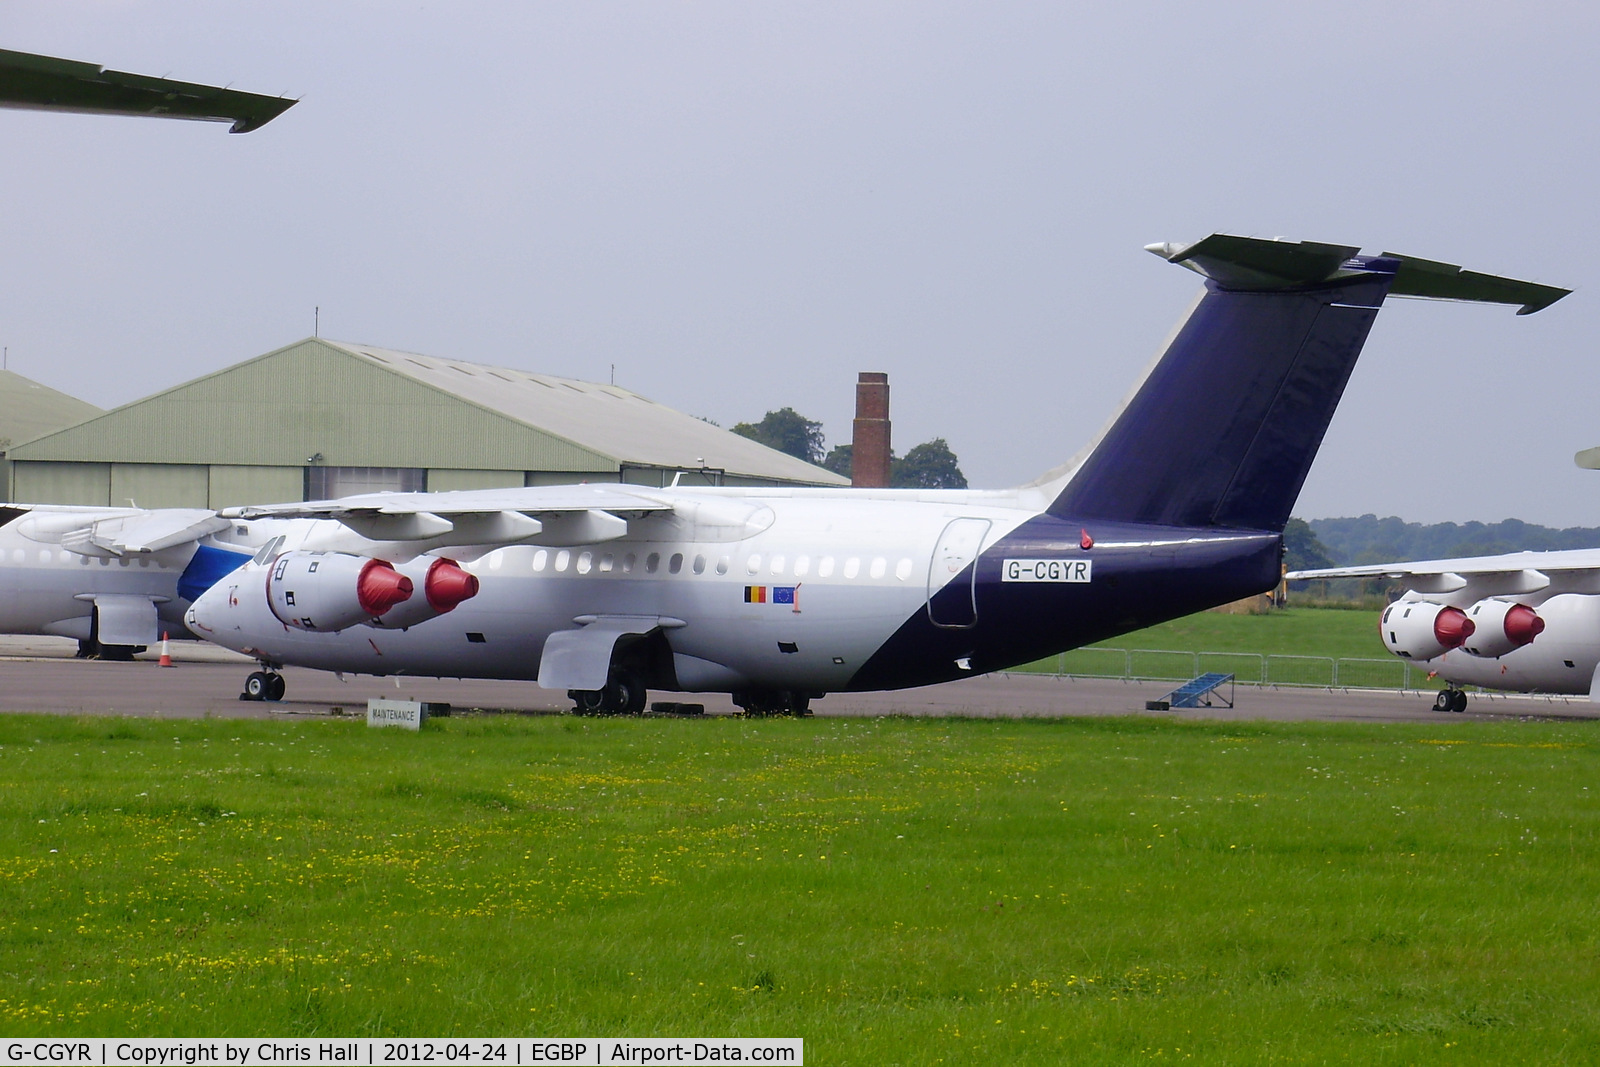 G-CGYR, 1995 British Aerospace Avro 146-RJ85 C/N E.2273, ex OO-DJL Brussels Airlines in storage at Kemble